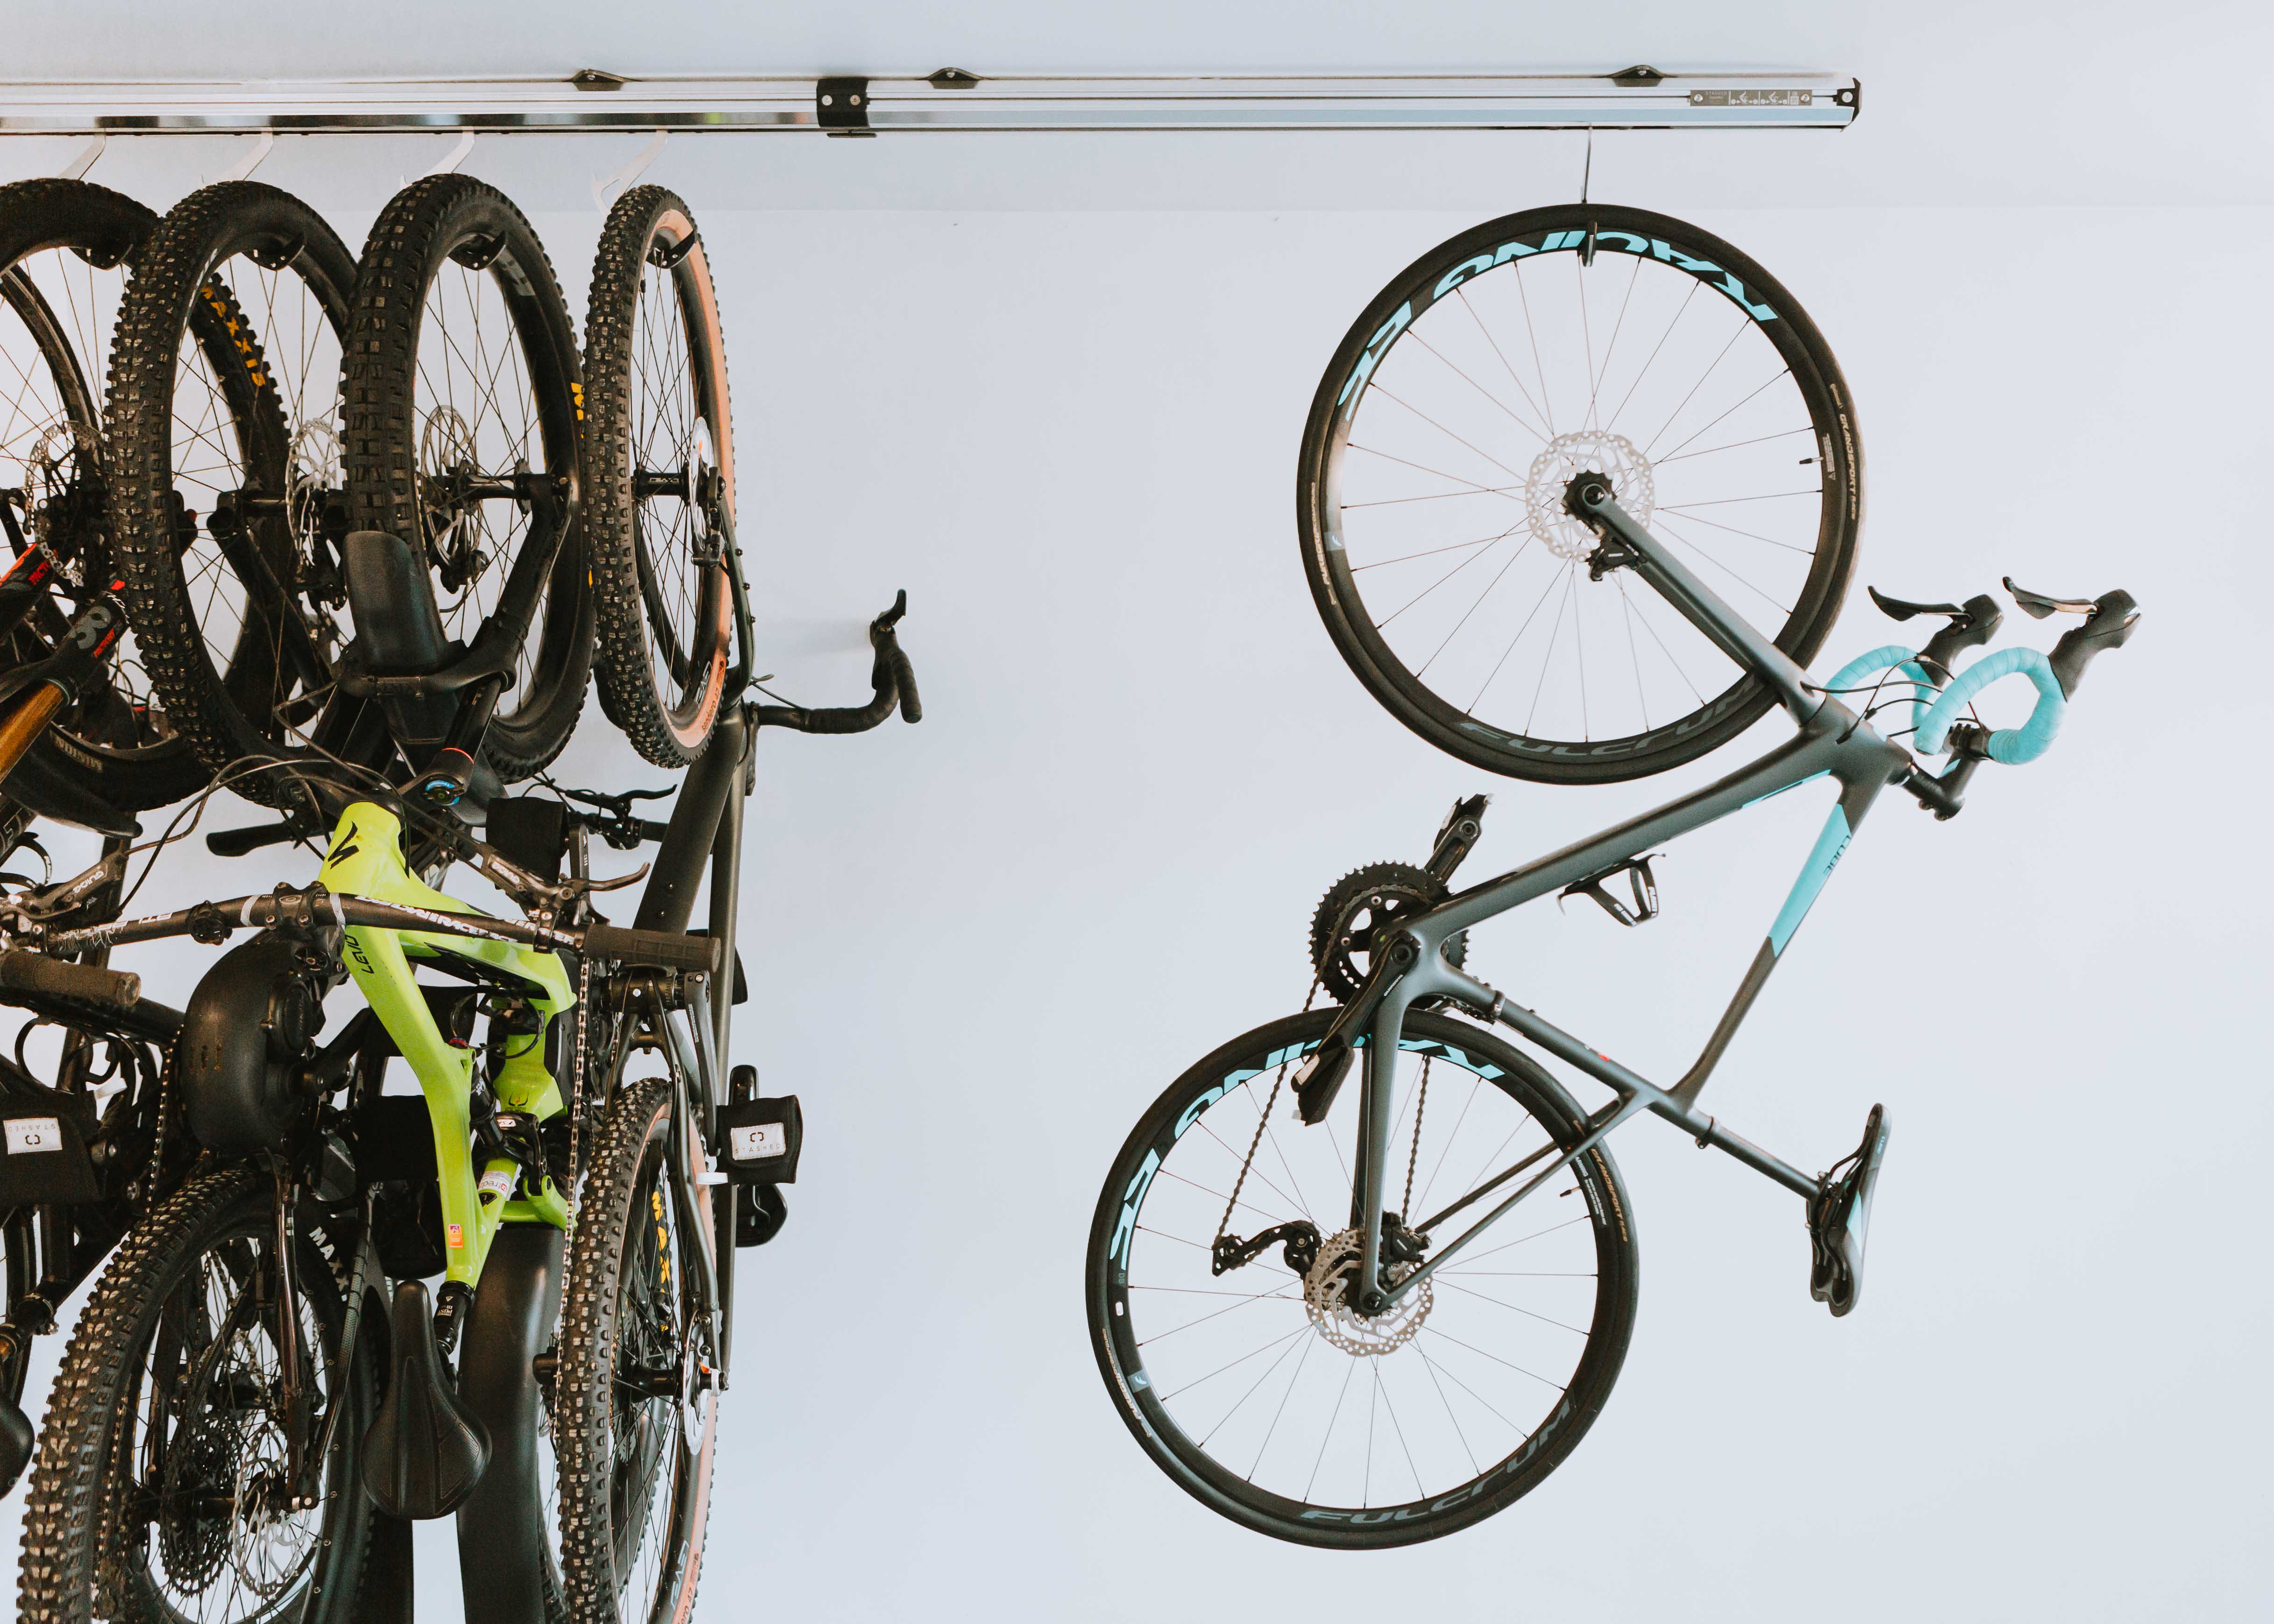 3.... 2.... 1.... the SpaceRail launches! Space saving bike storage!